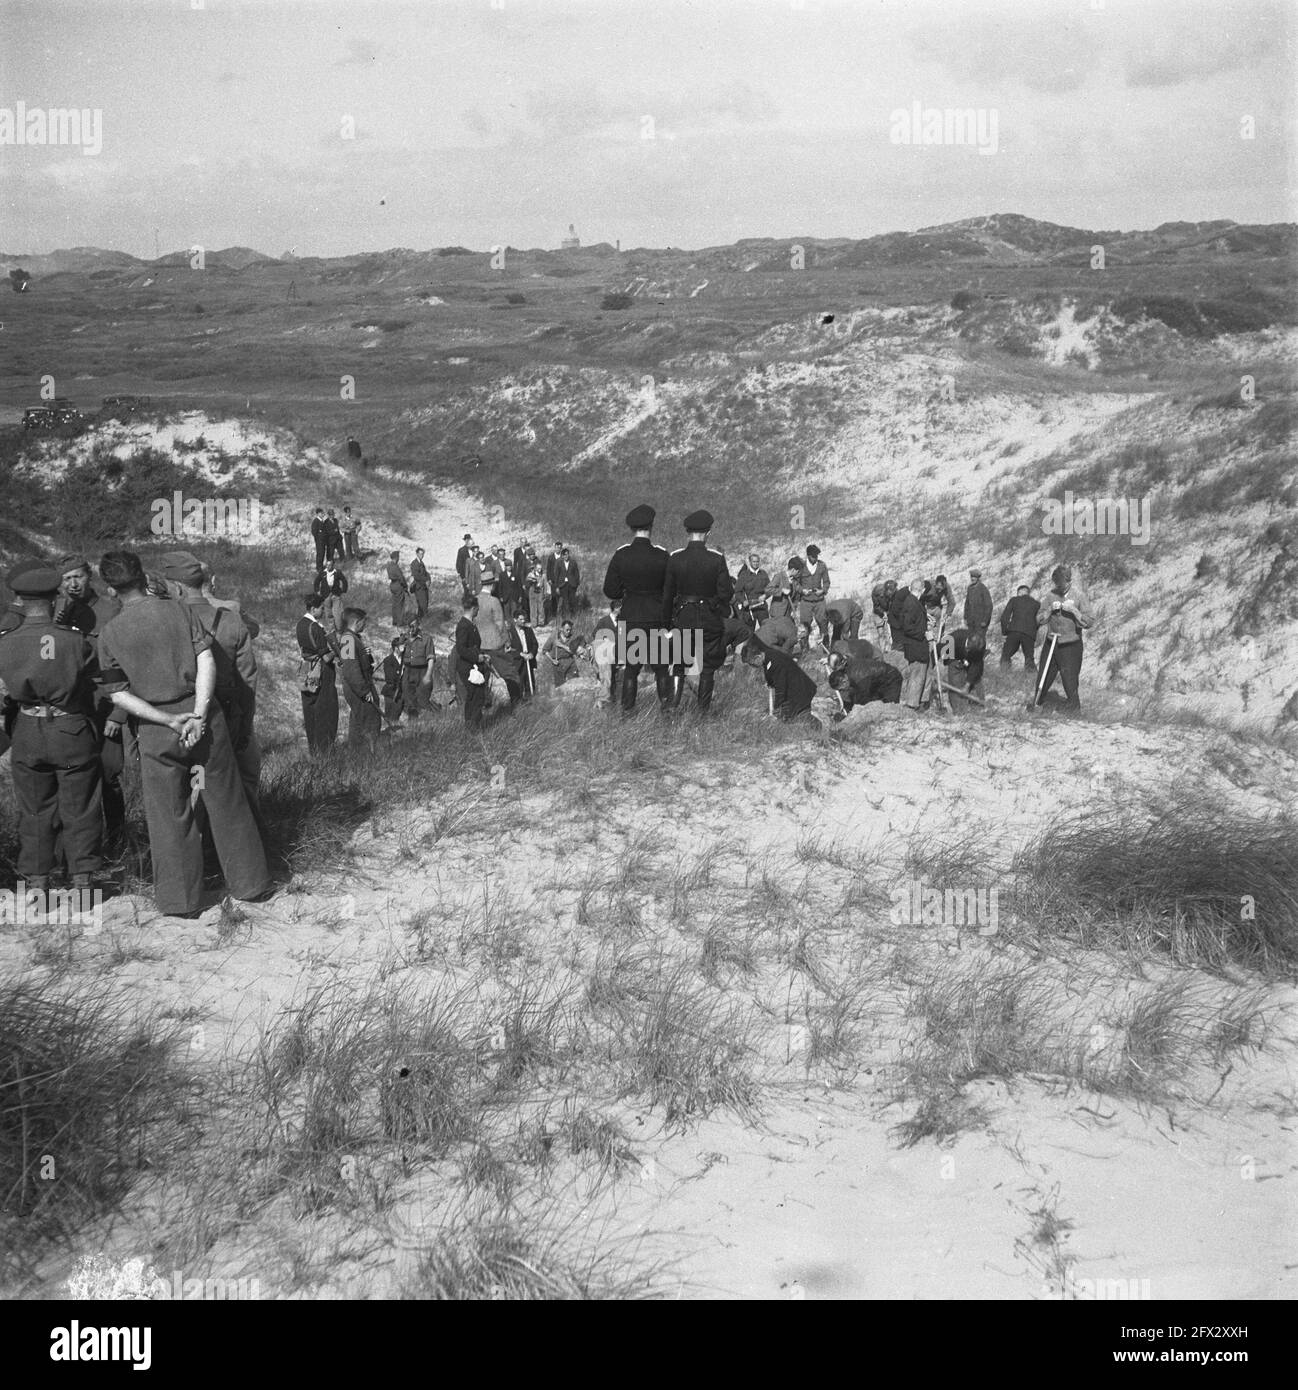 Mass grave at Waalsdorp. German war criminals and Dutch collaborators give instructions where victims of their crimes are buried and do the digging themselves. Dutch police supervise. Canadian soldiers look on, August 1945, mass graves, excavations, second world war, The Netherlands, 20th century press agency photo, news to remember, documentary, historic photography 1945-1990, visual stories, human history of the Twentieth Century, capturing moments in time Stock Photo